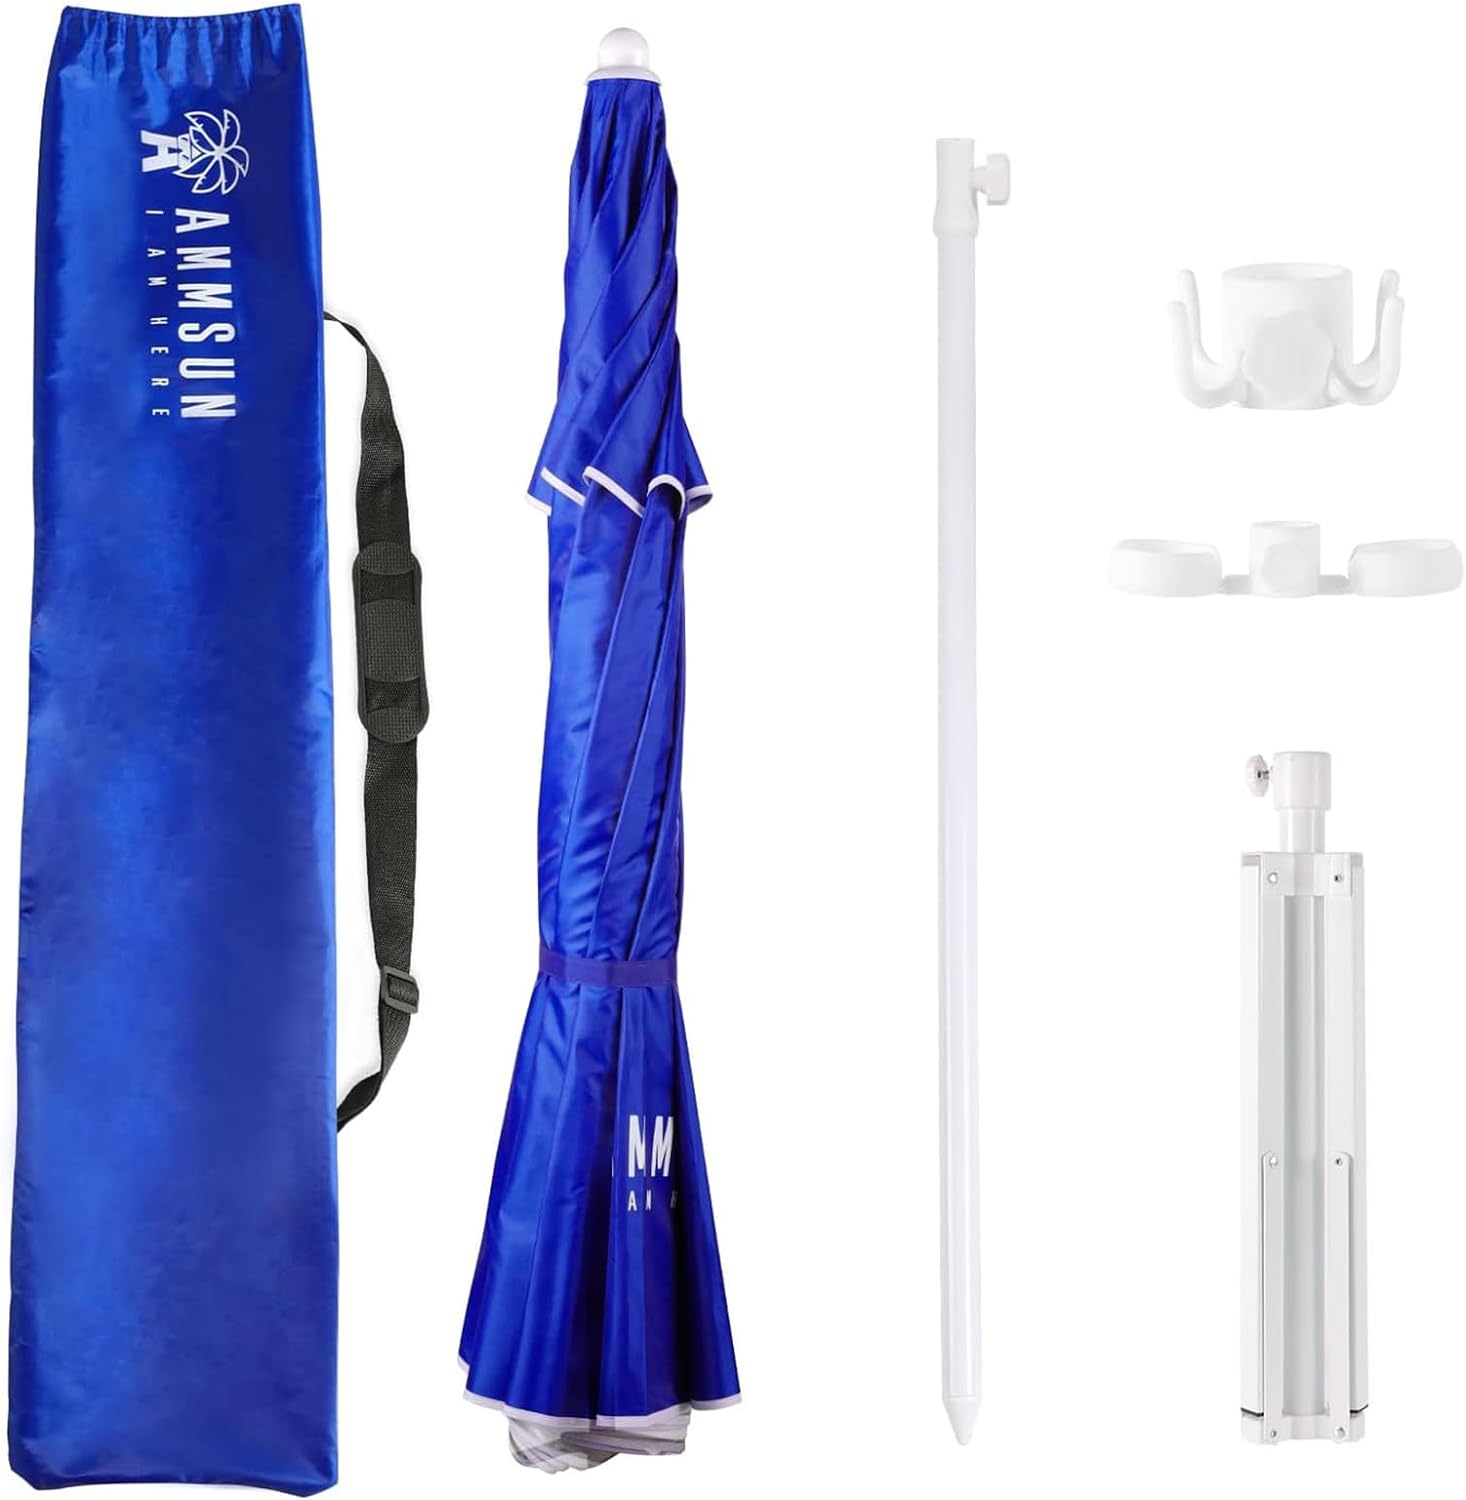 AMMSUN 6.5ft Lightweight Portable Sports Umbrella with Stand Blue